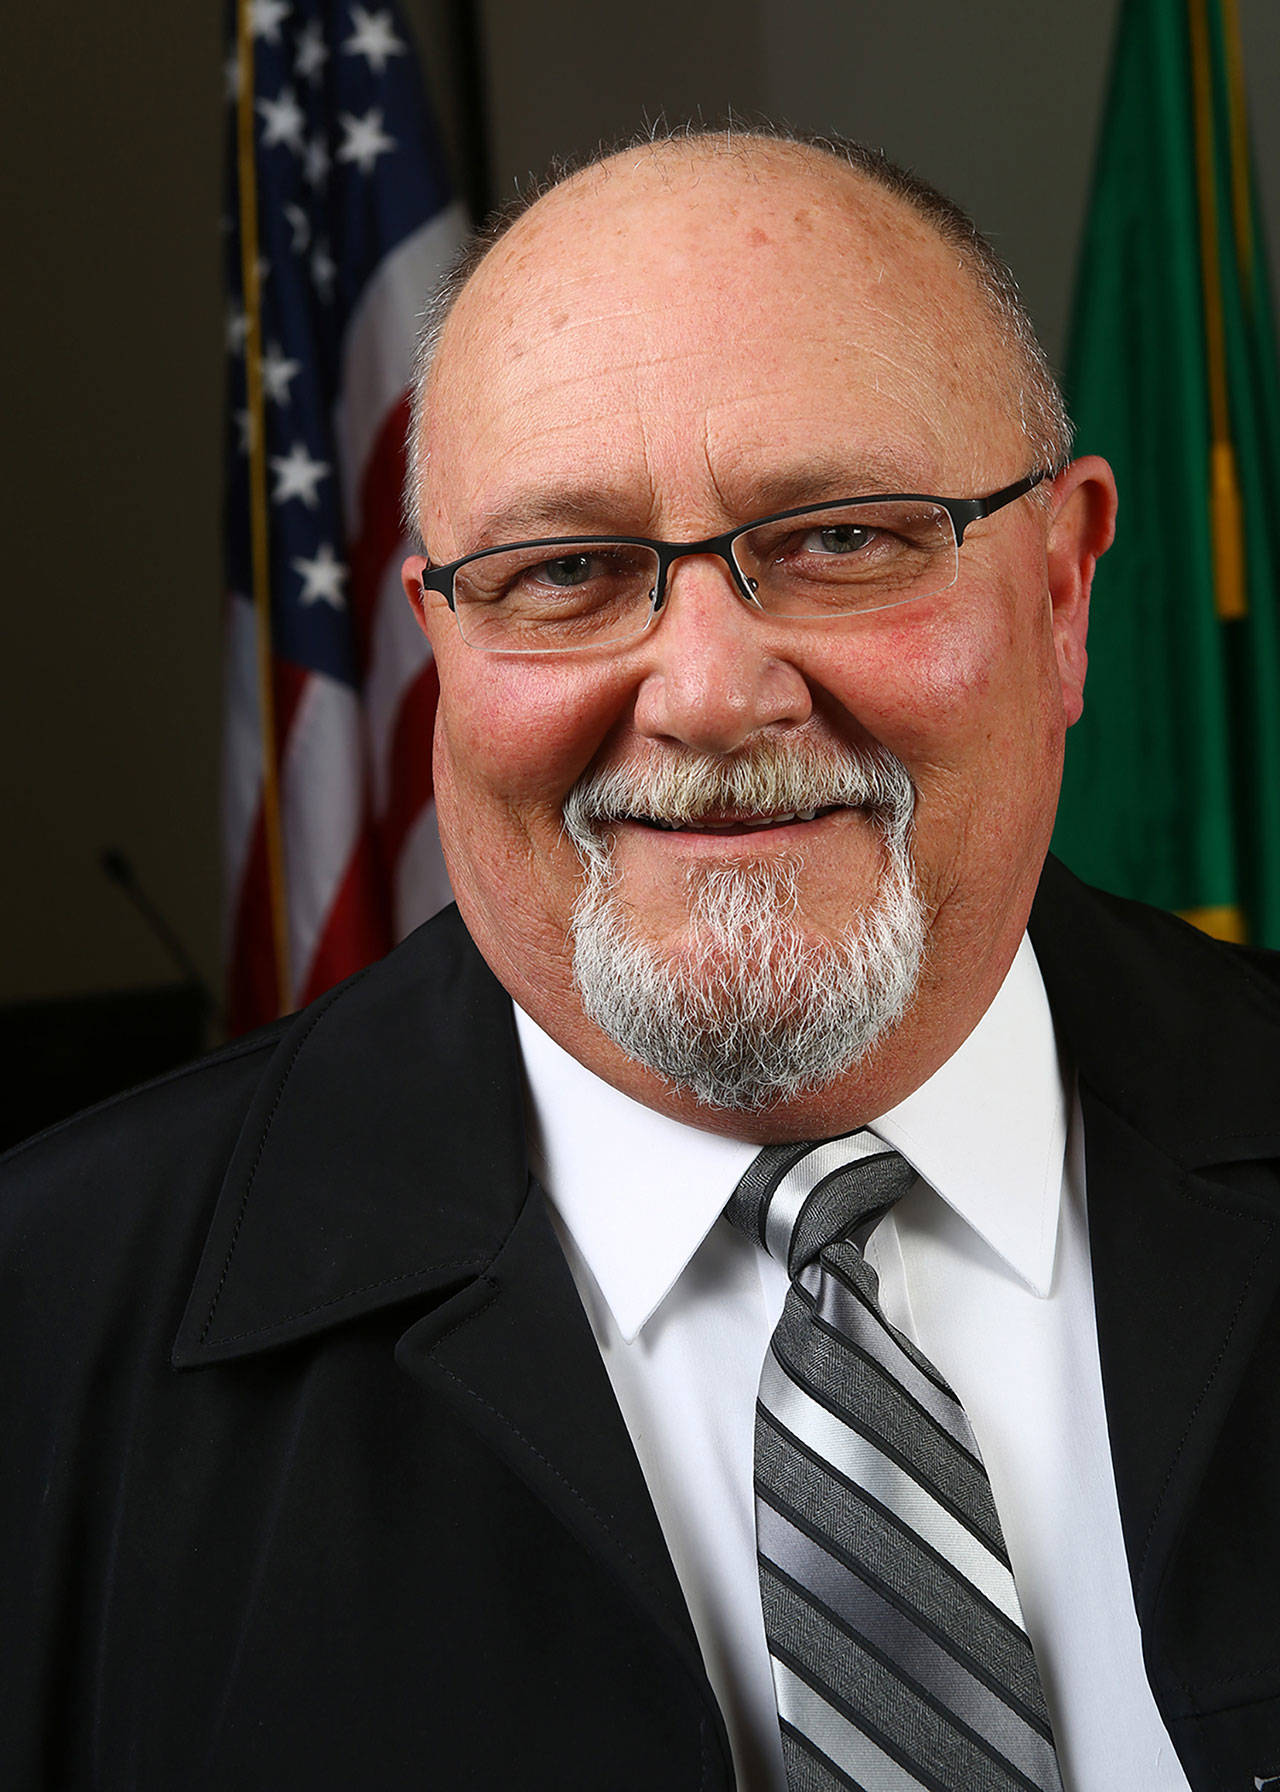 Friends and fellow Sequim city councilors remember John Miller, who died on Nov. 29, as a humorous person who cared deeply about the community. Photo courtesy of City of Sequim